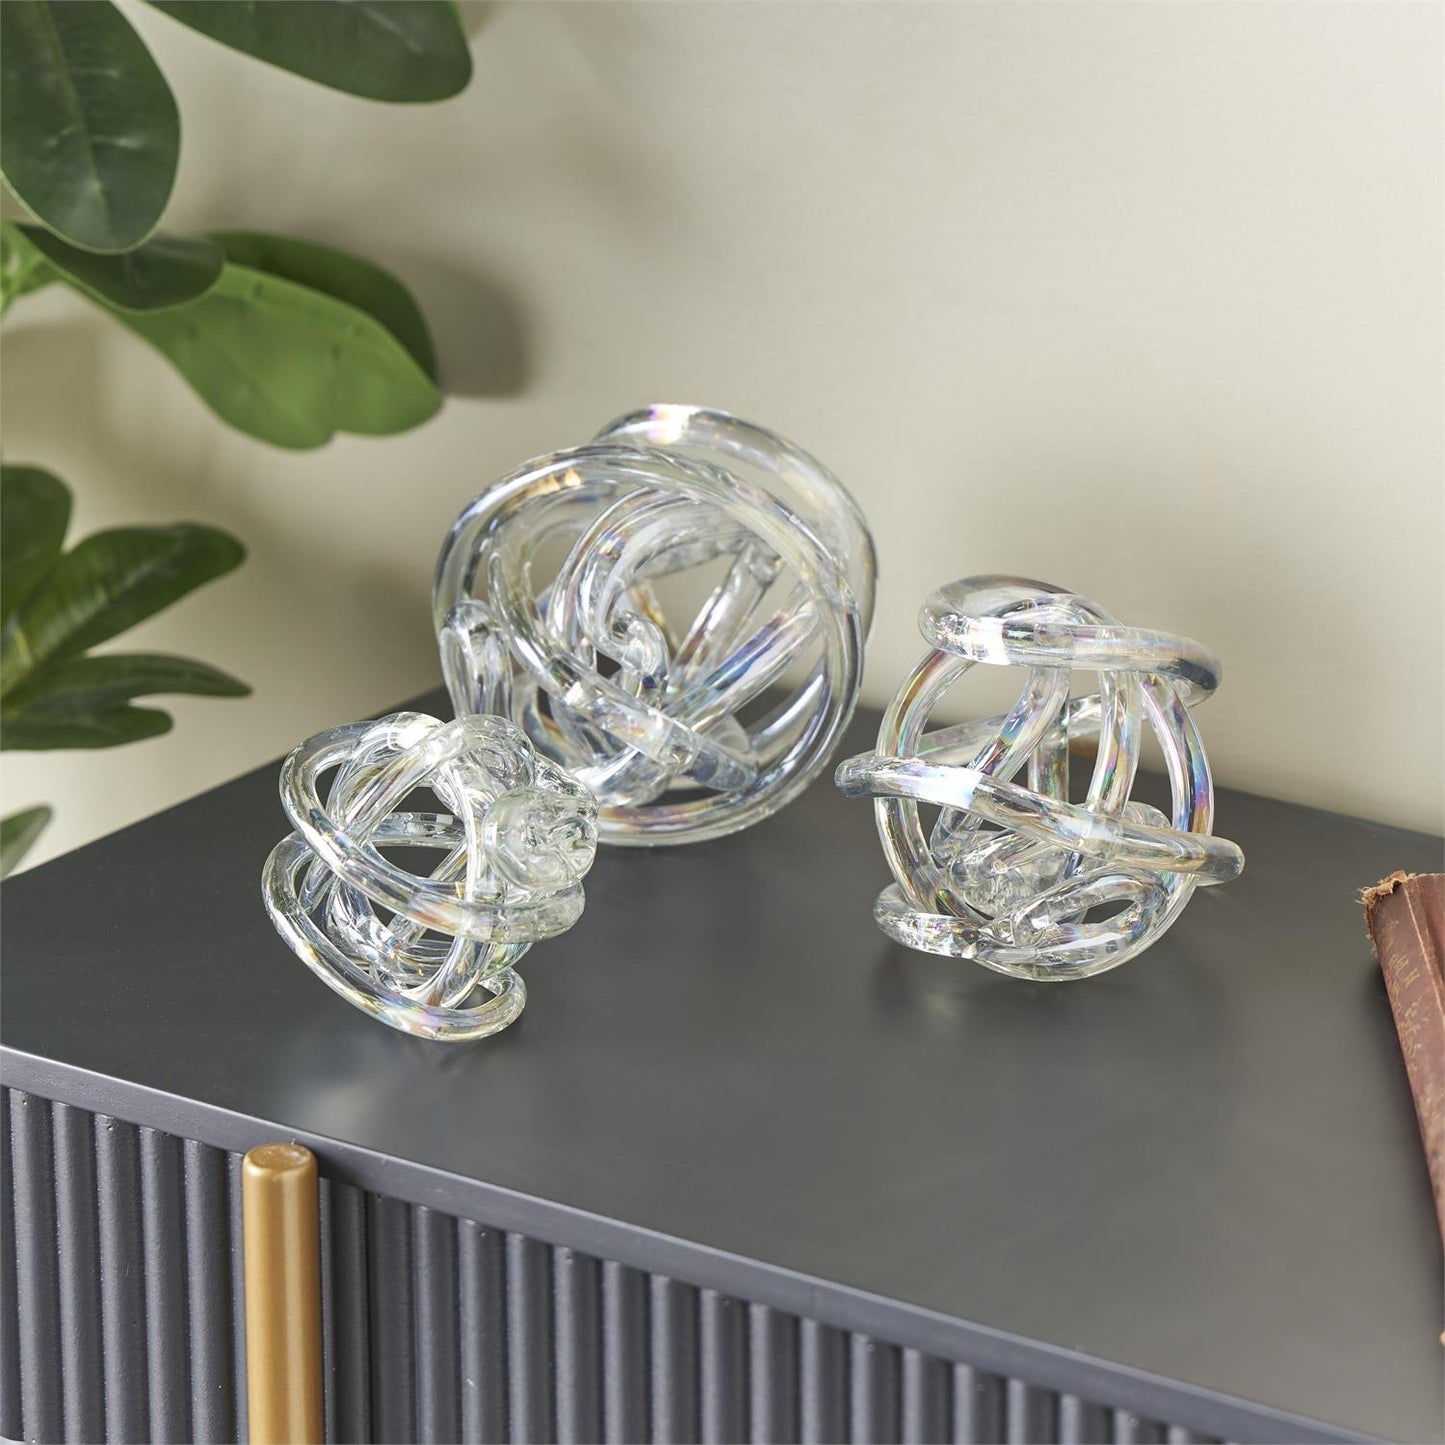 CLEAR GLASS KNOT KNOTTED BALL SCULPTURE, SET OF 3 5", 4", 4"W